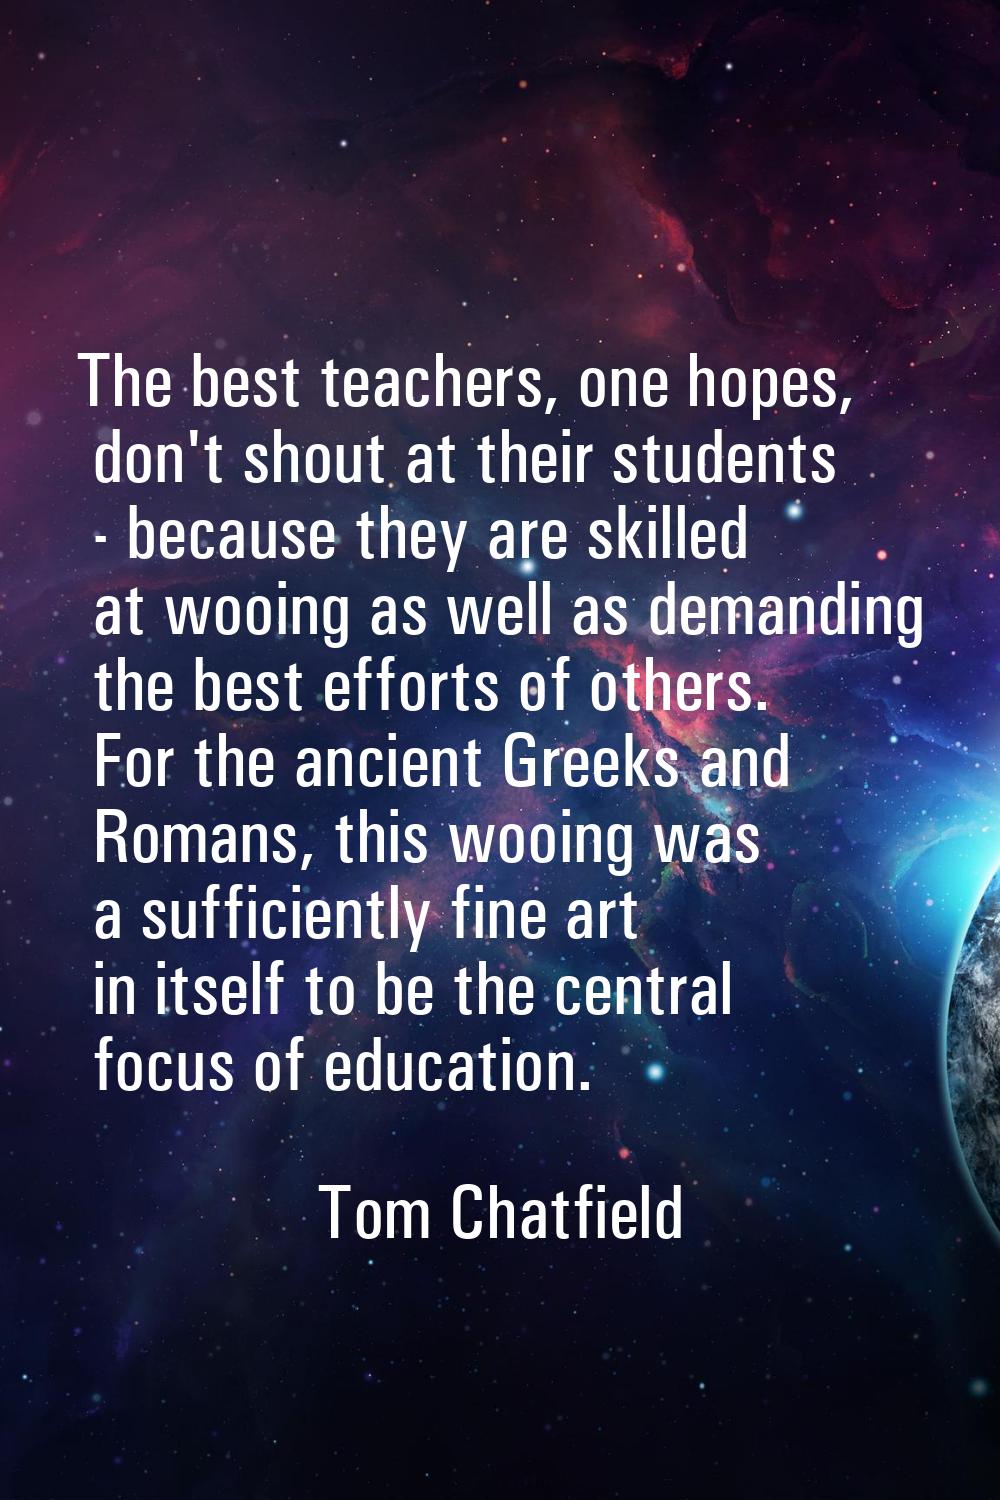 The best teachers, one hopes, don't shout at their students - because they are skilled at wooing as